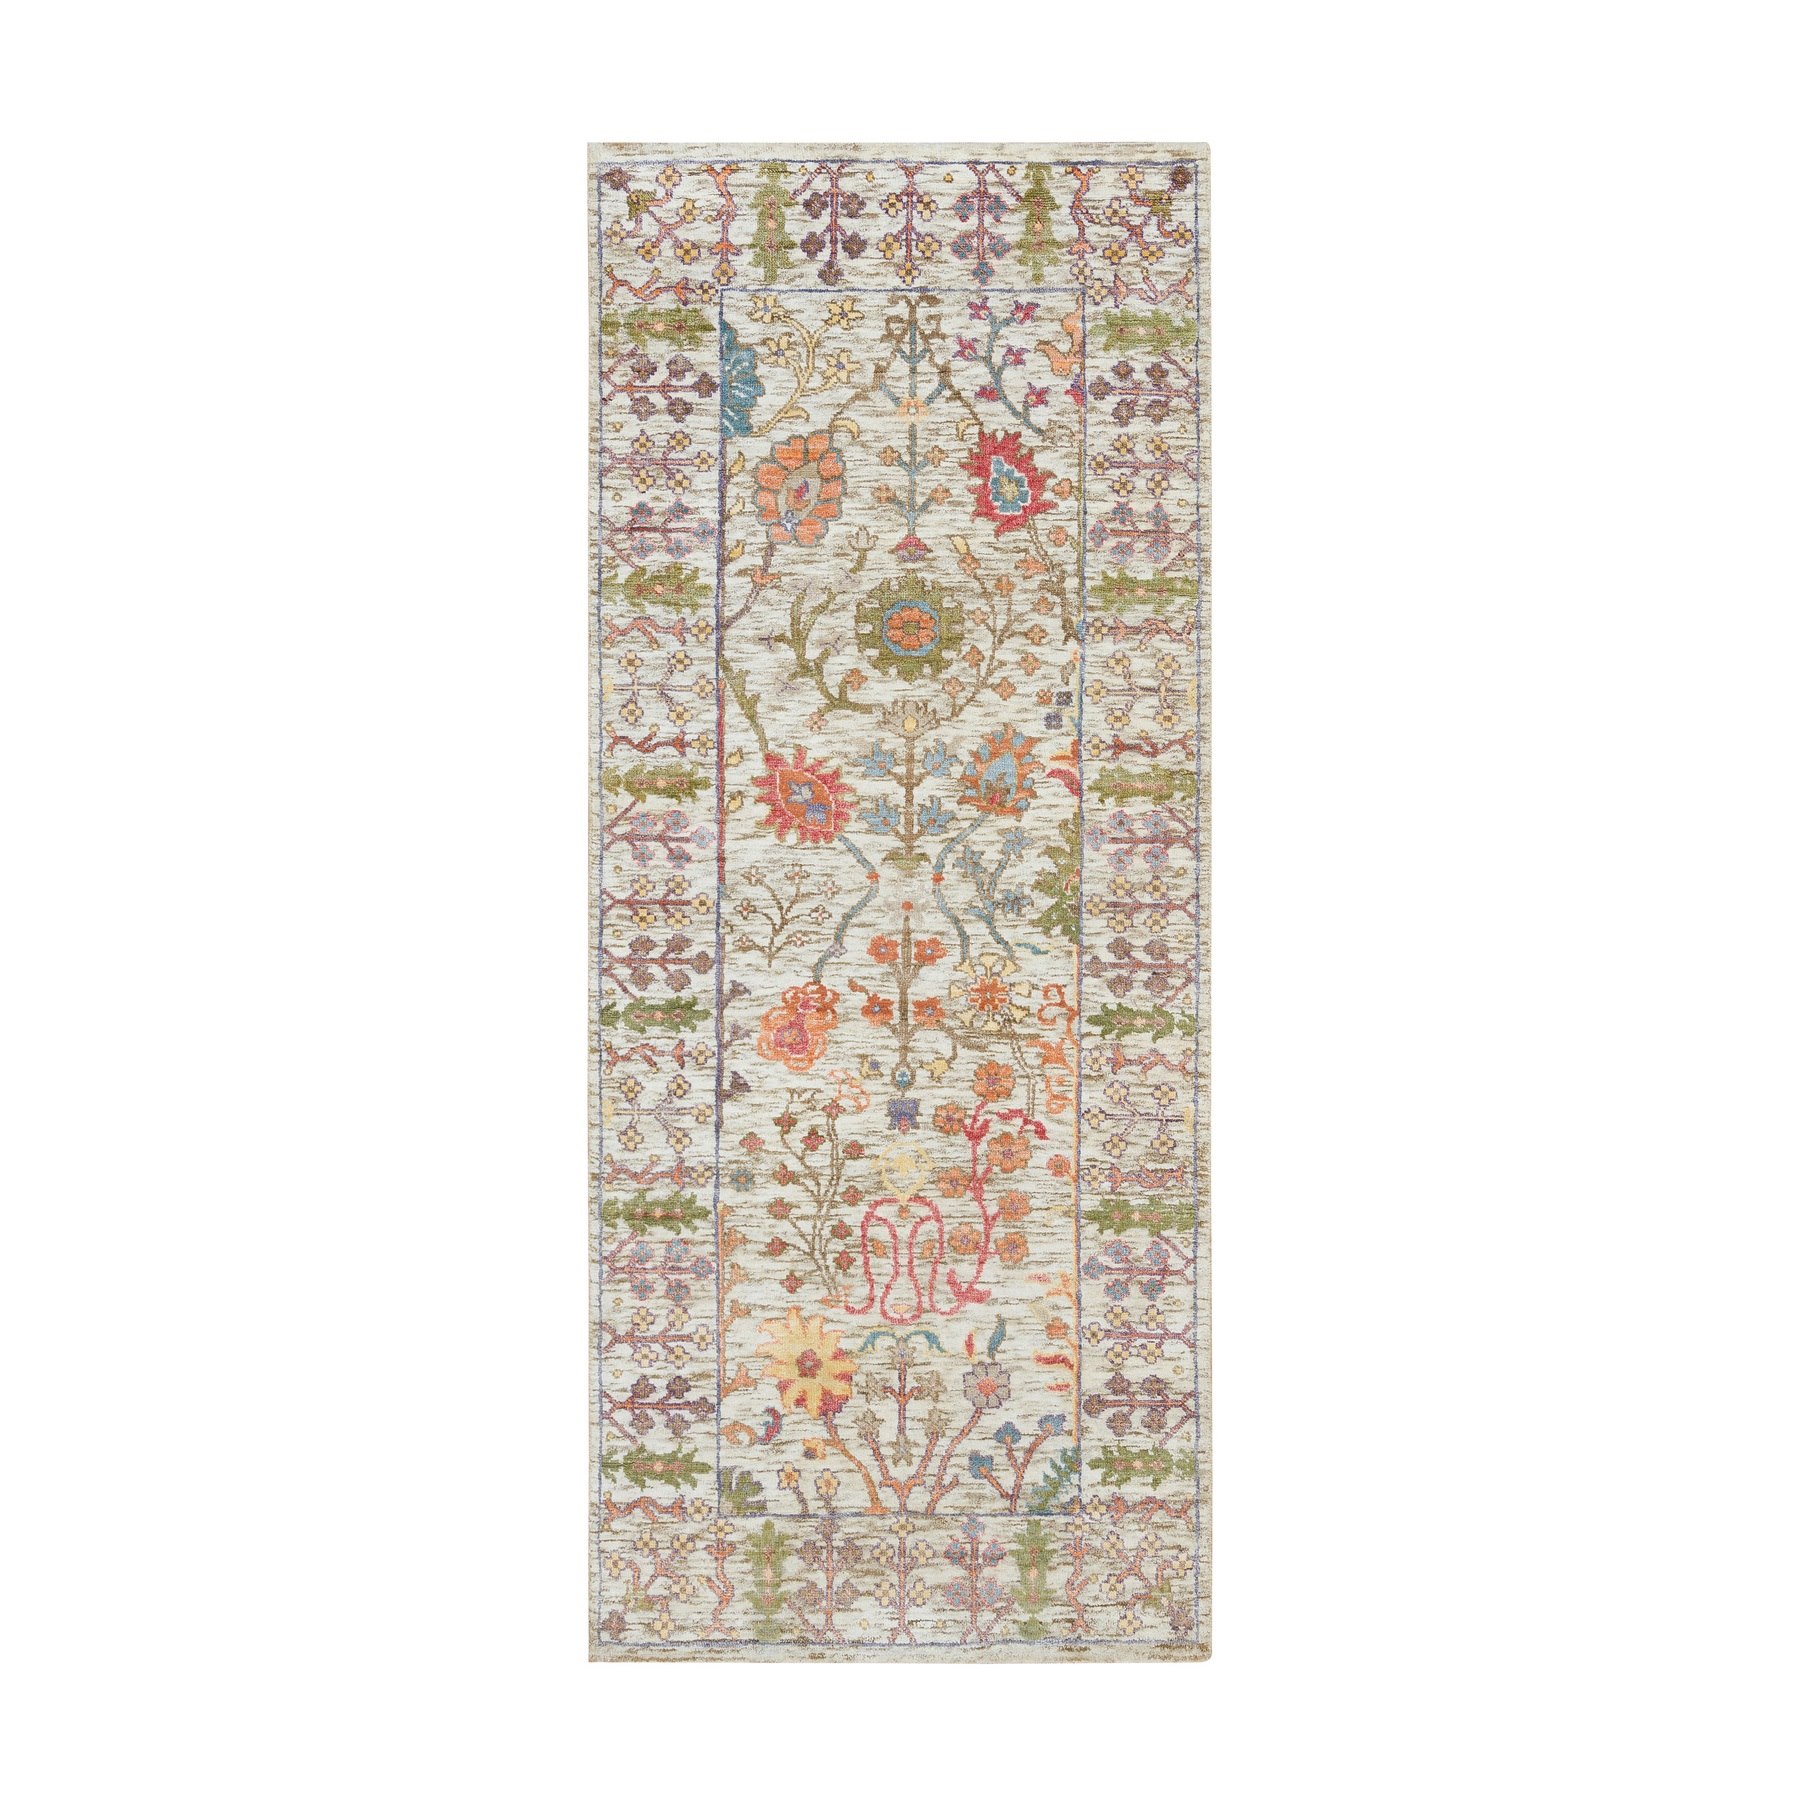 Wool and Silk Rugs LUV593253